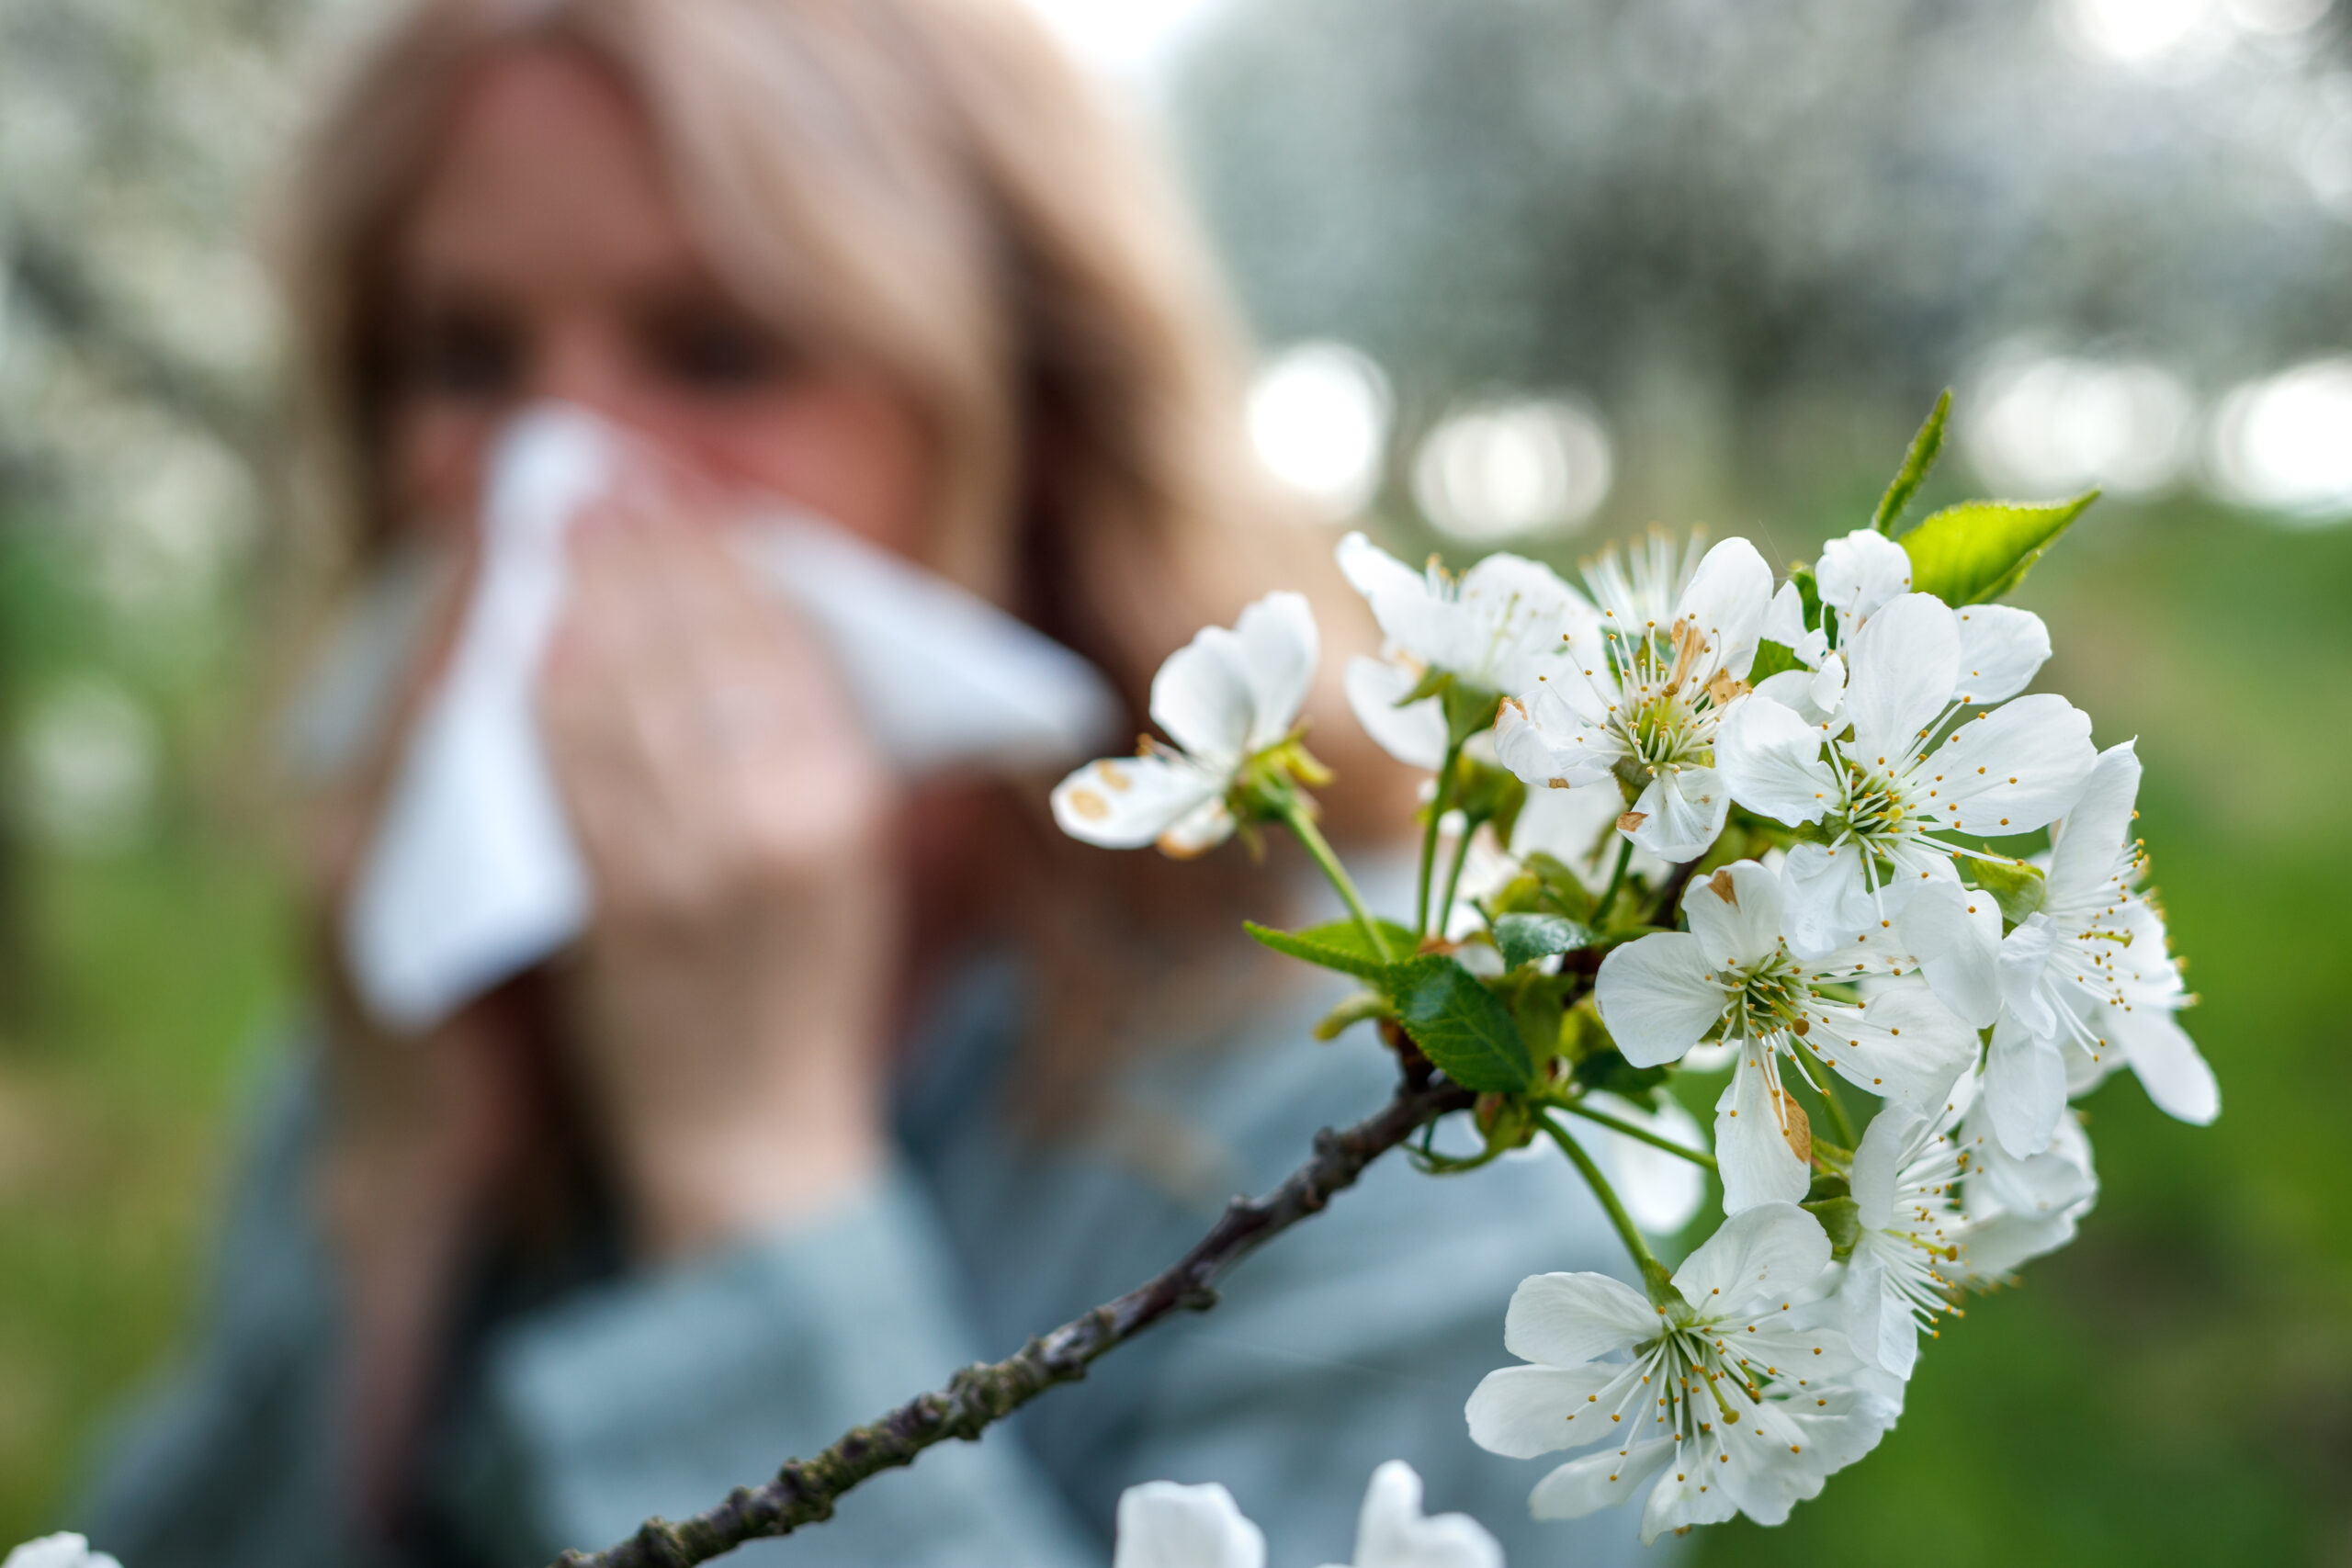 How seasonal allergies can affect your hearing